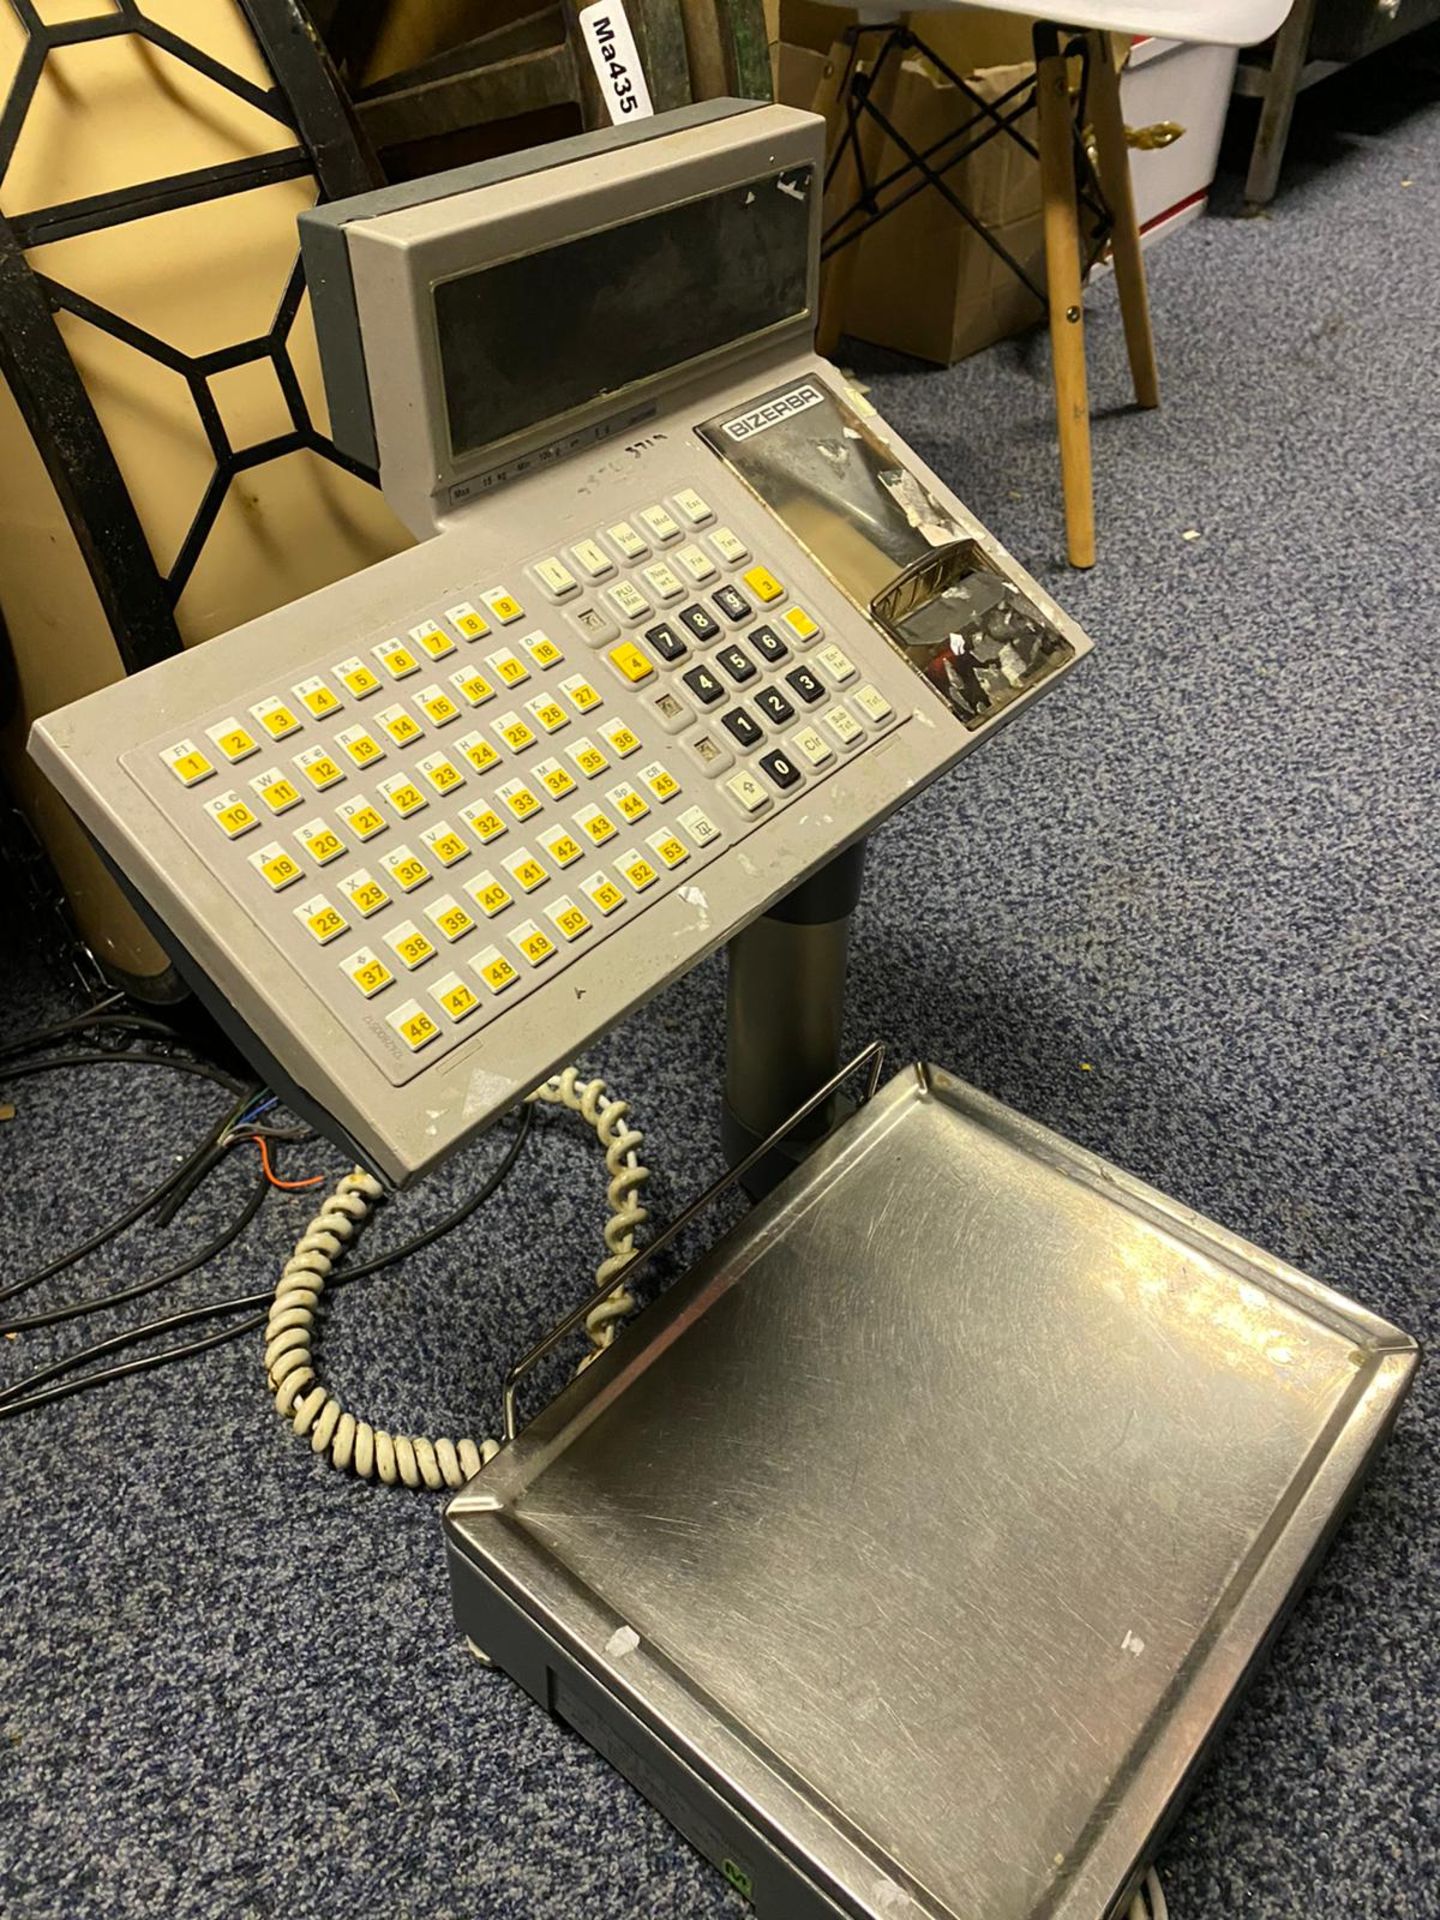 1 x Bizerba SC-H Basic Retail Weighing Scale - Used Condition - Location: Altrincham WA14 - - Image 3 of 6